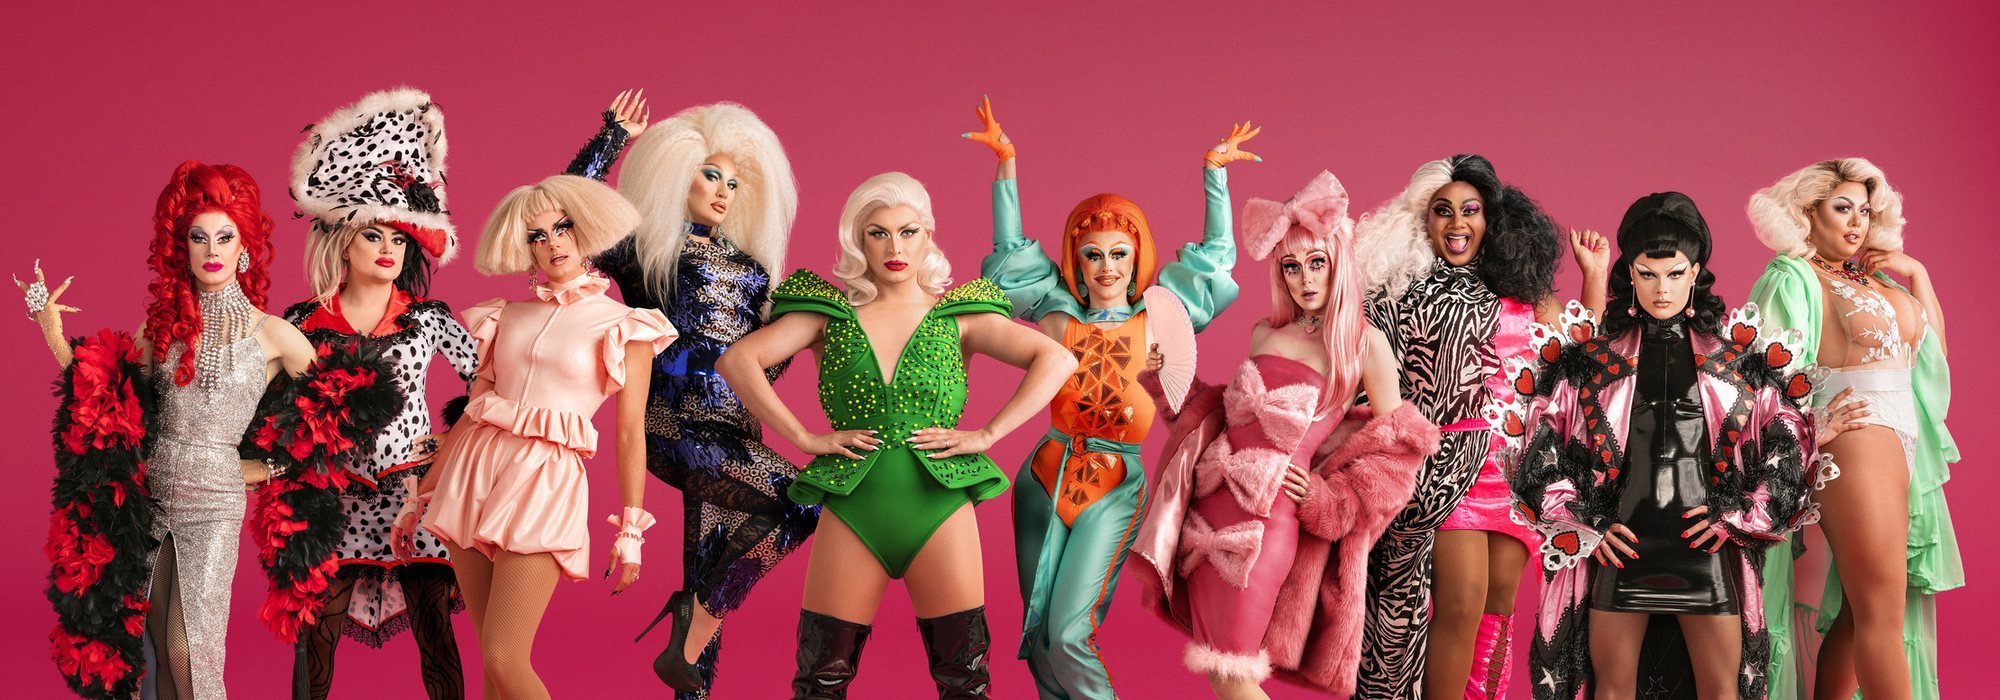 Contestants of the reality show RuPaul's Drag Race